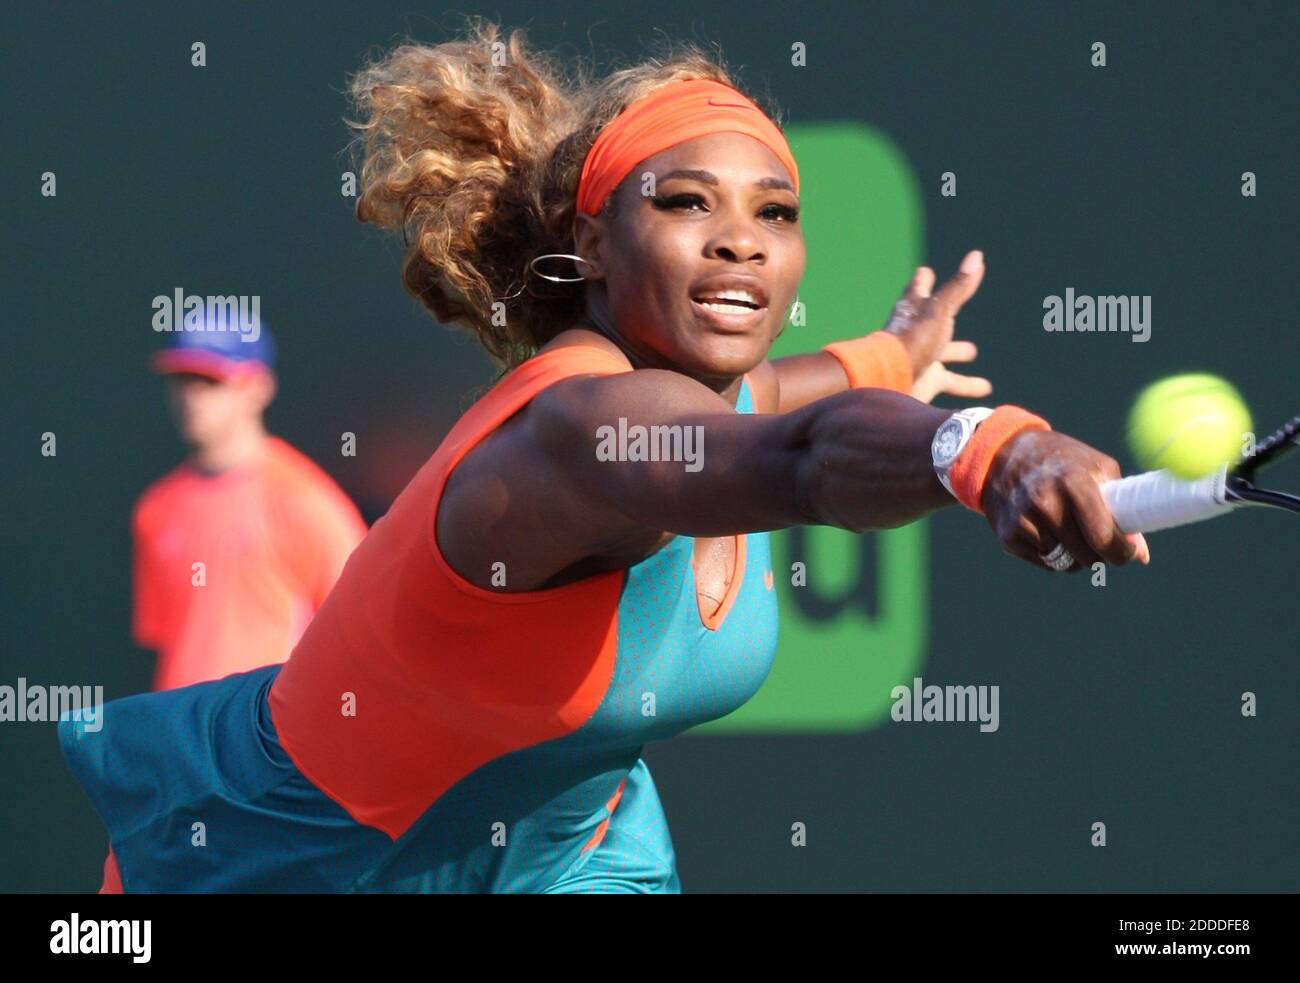 NO FILM, NO VIDEO, NO TV, NO DOCUMENTARY - USA's Serena Williams competes  against Kazakhstan's Yaroslava Shvedova during the Sony Open tennis  tournament in Key Biscayne, FL, USA on March 20, 2014.